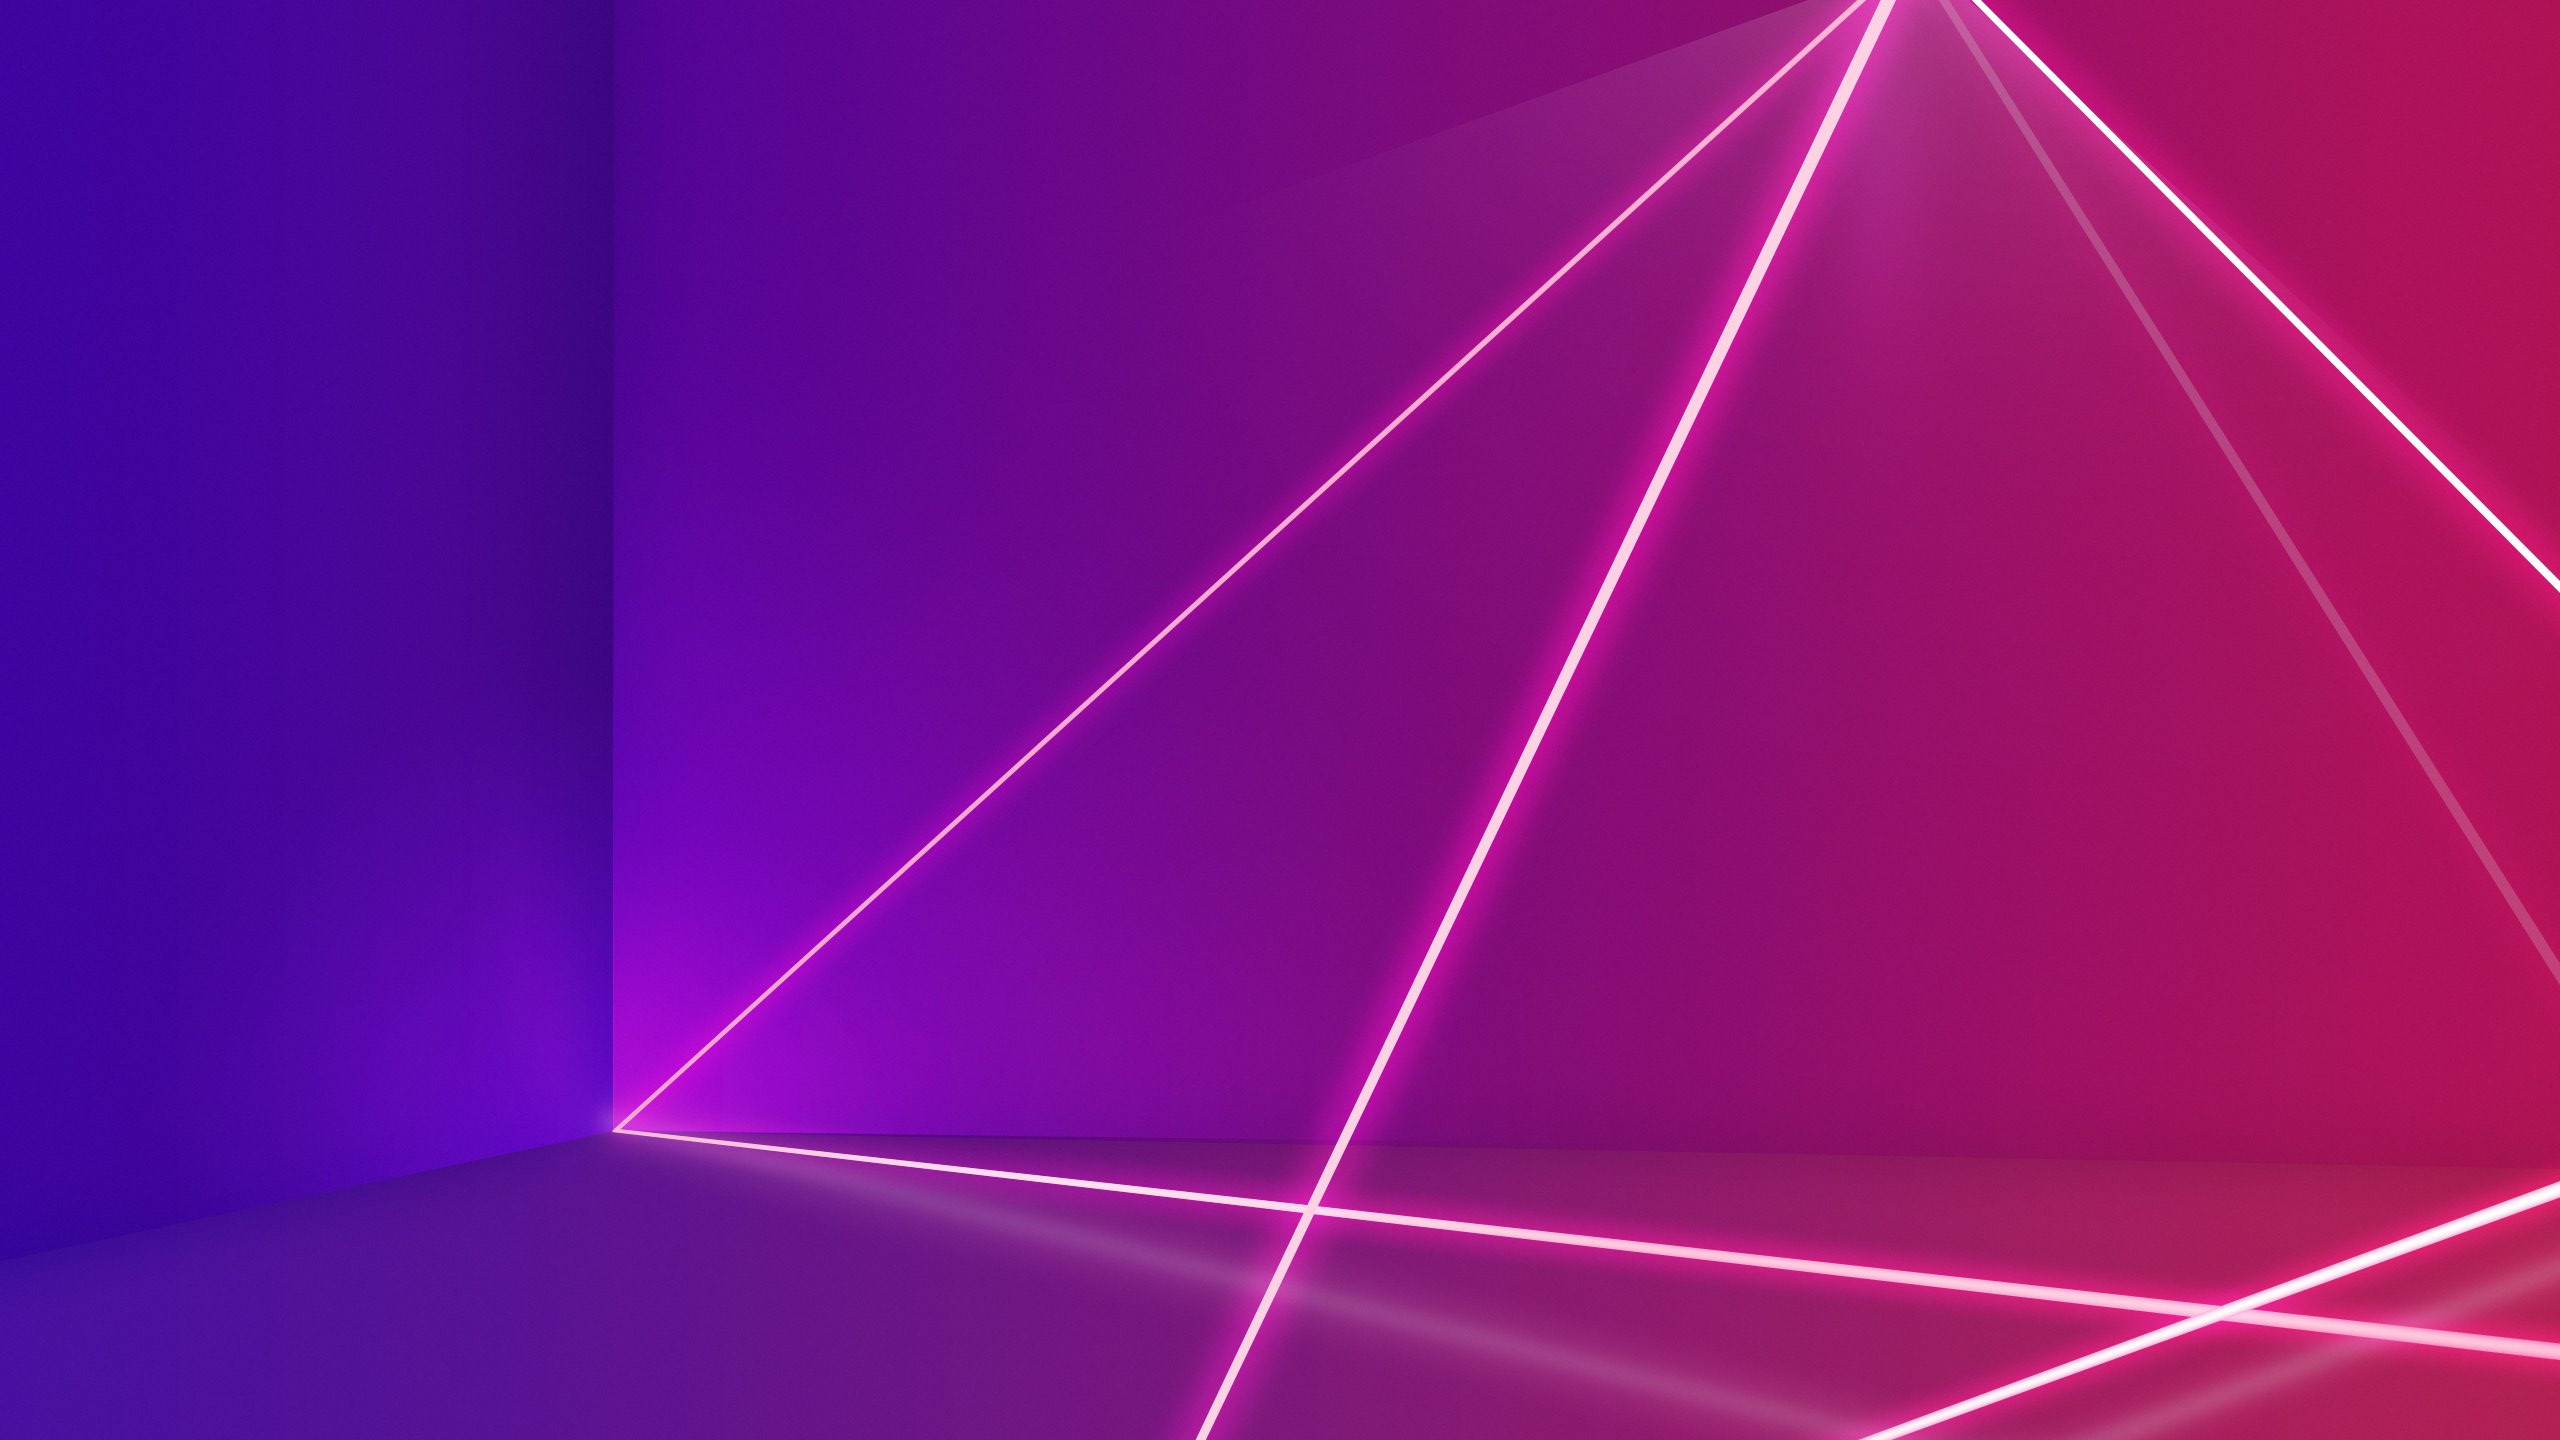 abstract lines pink neon purple wallpapers lg v30 backgrounds 2k hdwallpaperslife wallpapershome fhd